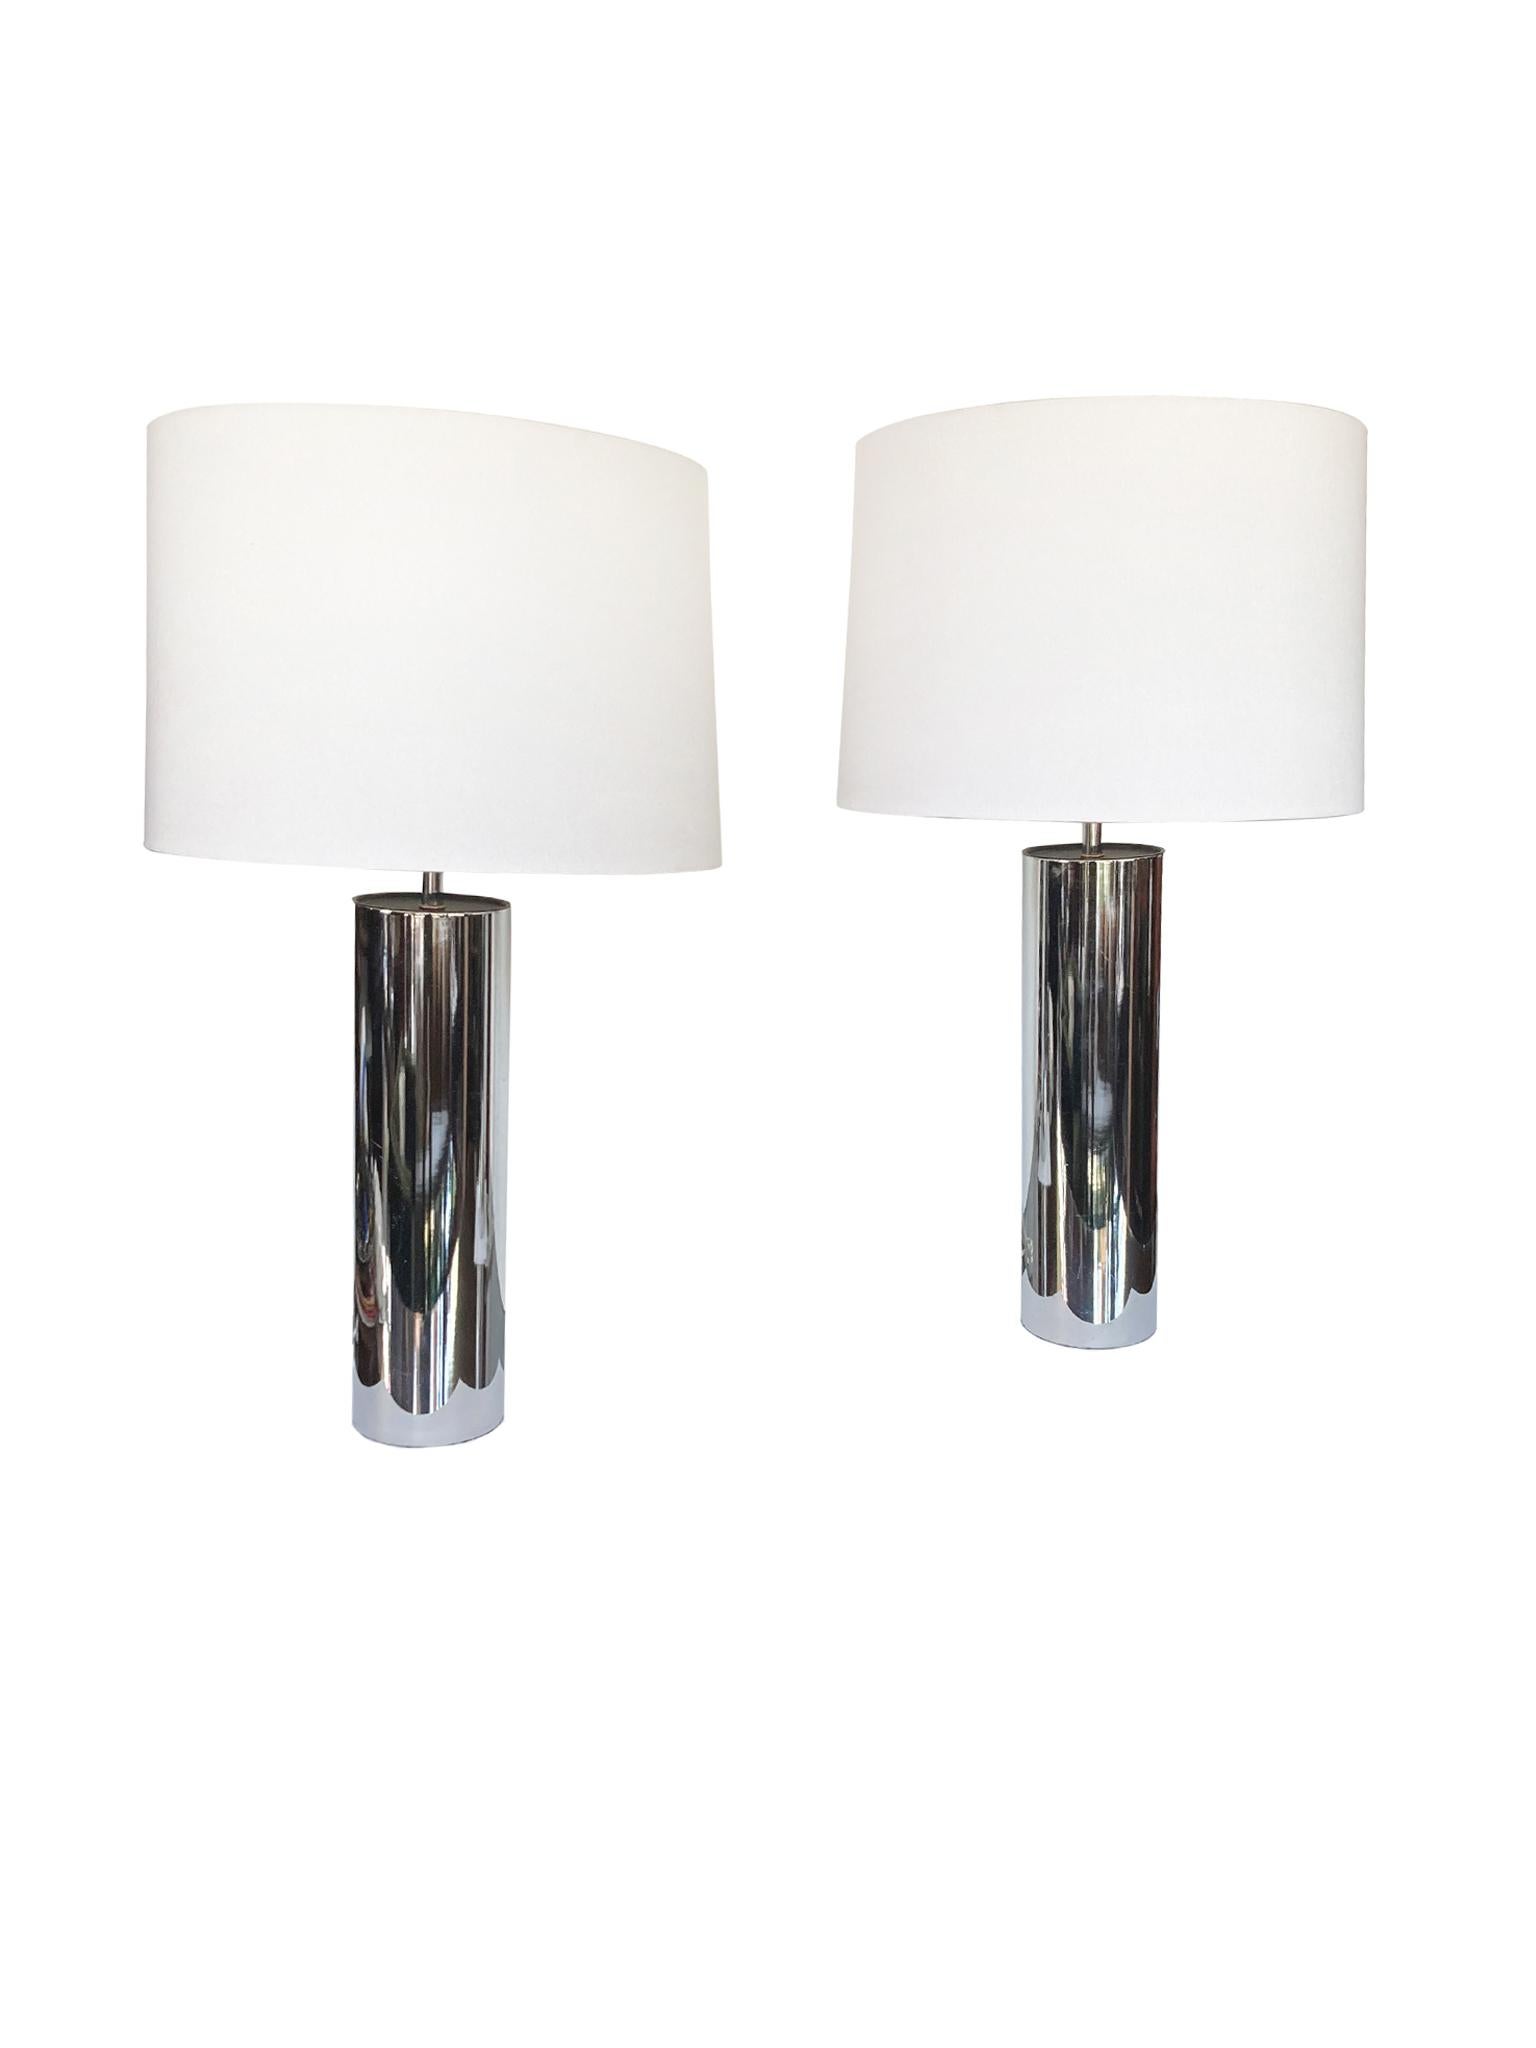 A pair of chrome table lamps attributed to the designer George Kovacs. We love the simplicity of these cylinder lamps. While their shape may seem basic, their high lustrous turns up the design. These are a classic.

The lamps are newly rewired